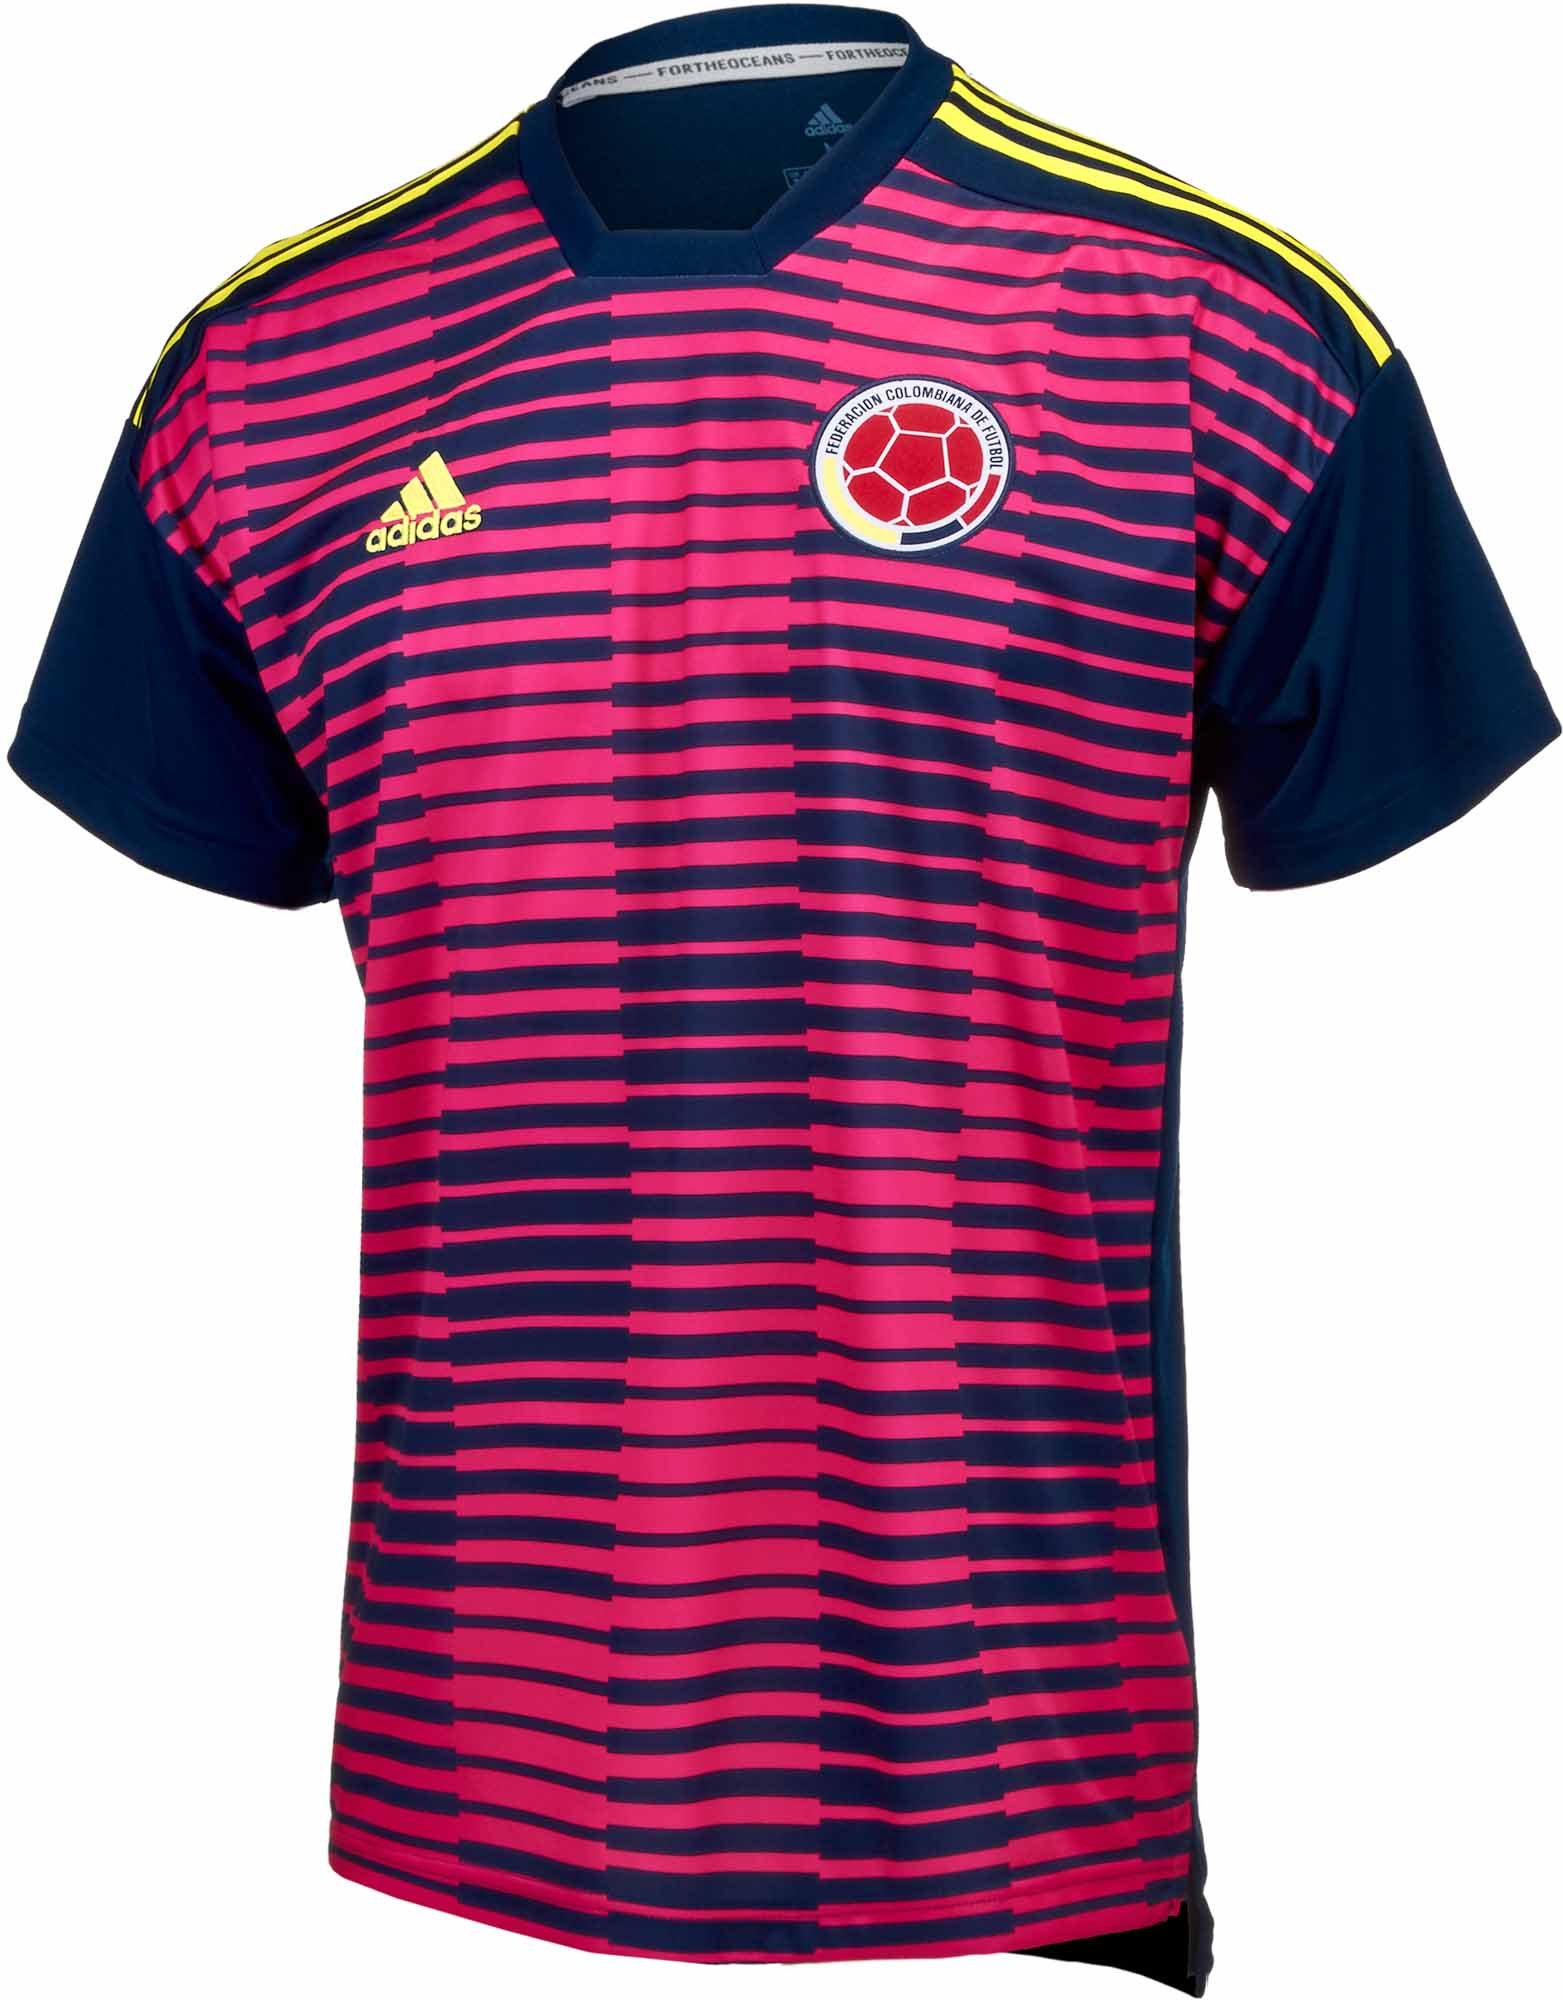 adidas colombia soccer jersey